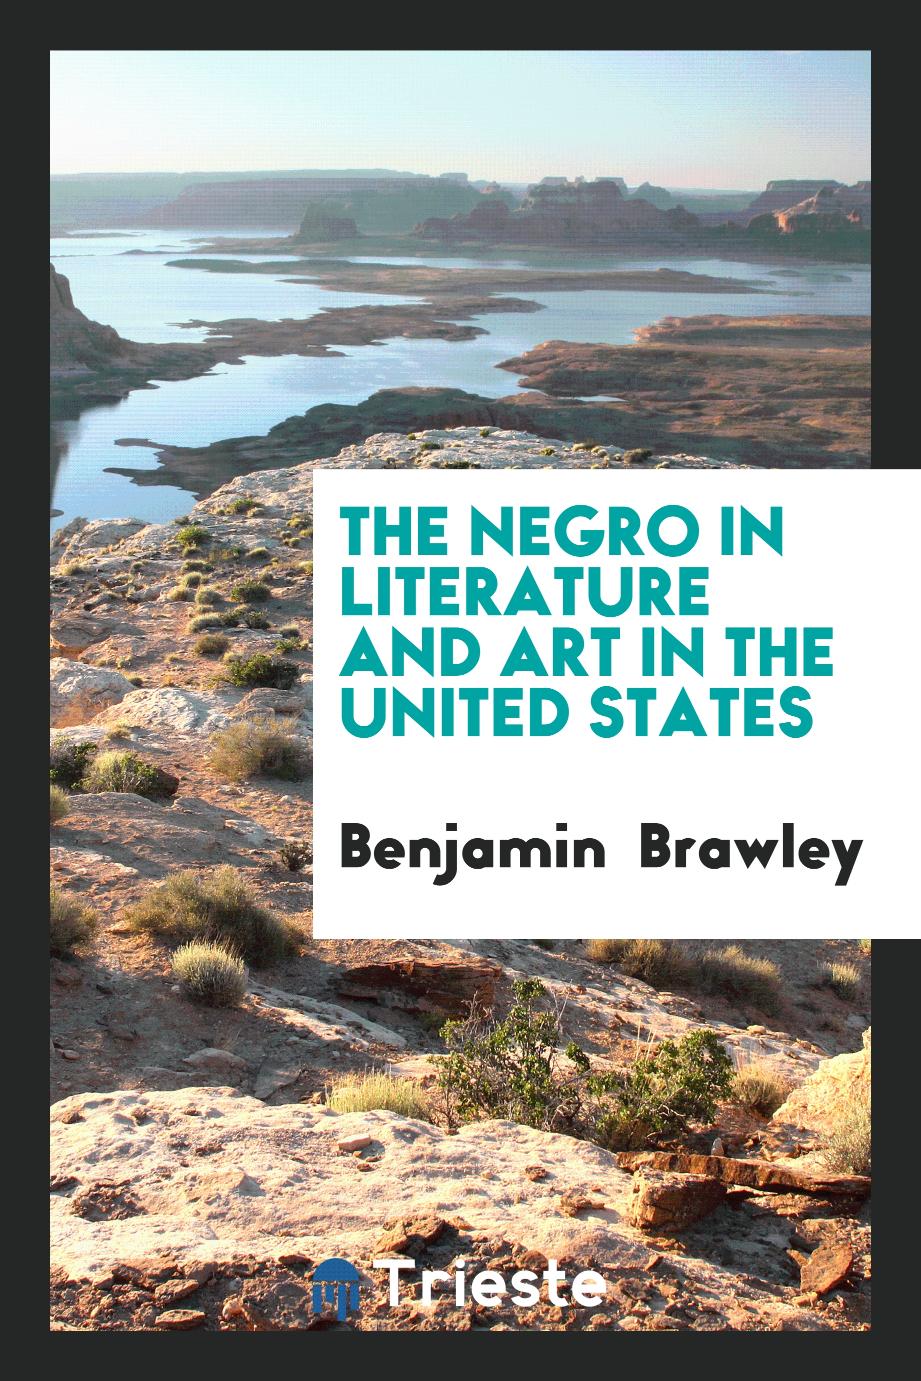 The negro in literature and art in the United States